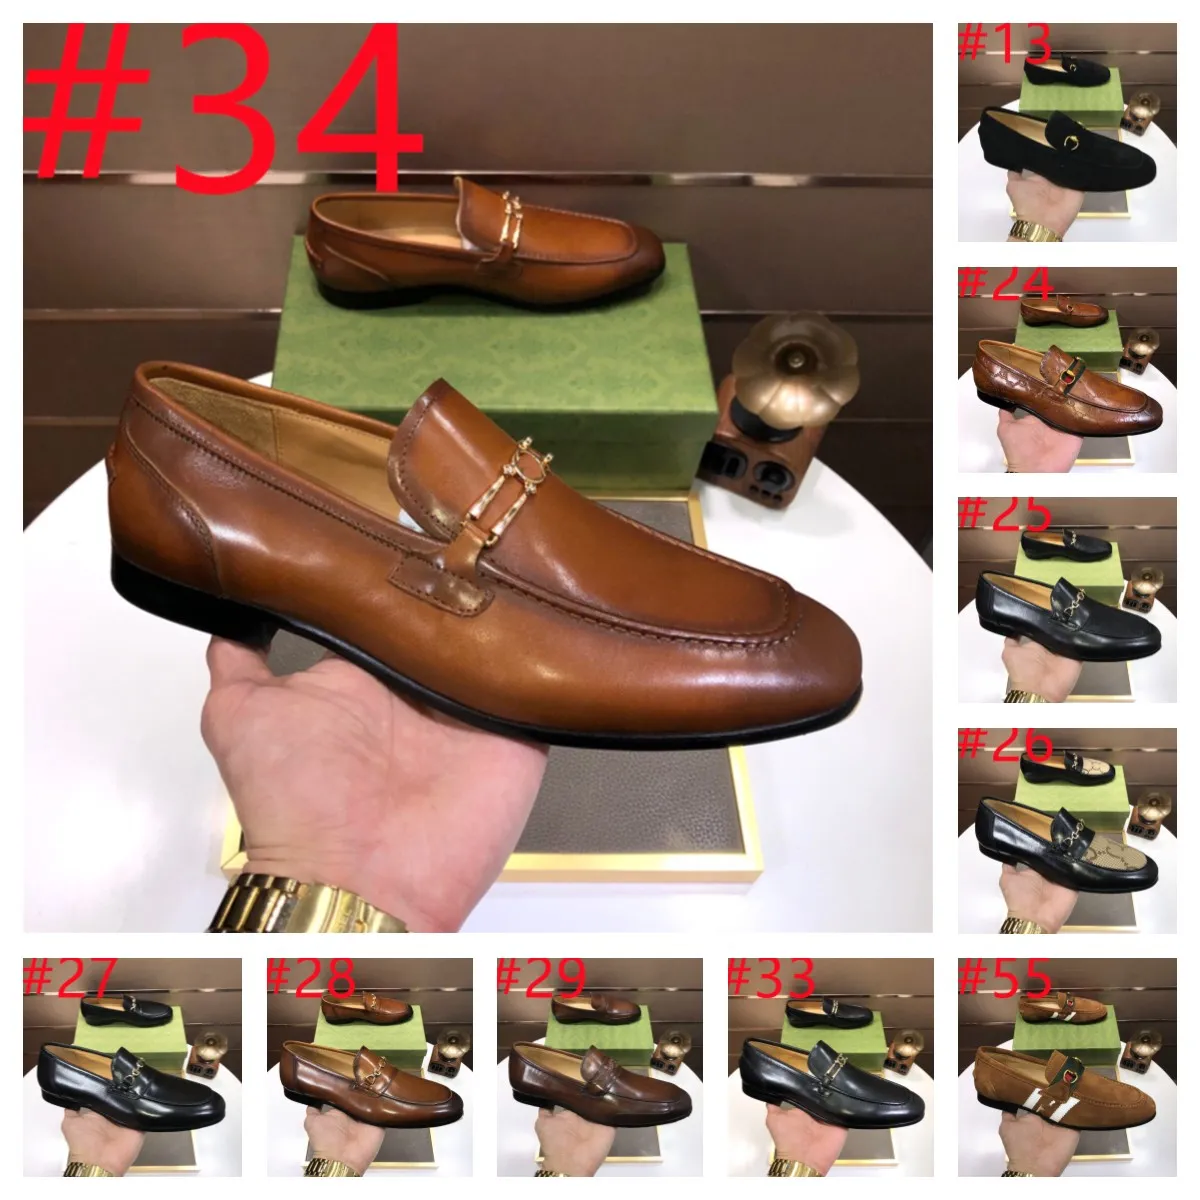 ItalianLuxury Italian Handmade Men's Oxford Shoes Real Calf Leather Black Brown Classic Brogue Business Wedding Designer Dress Shoes for Men Size 38-46